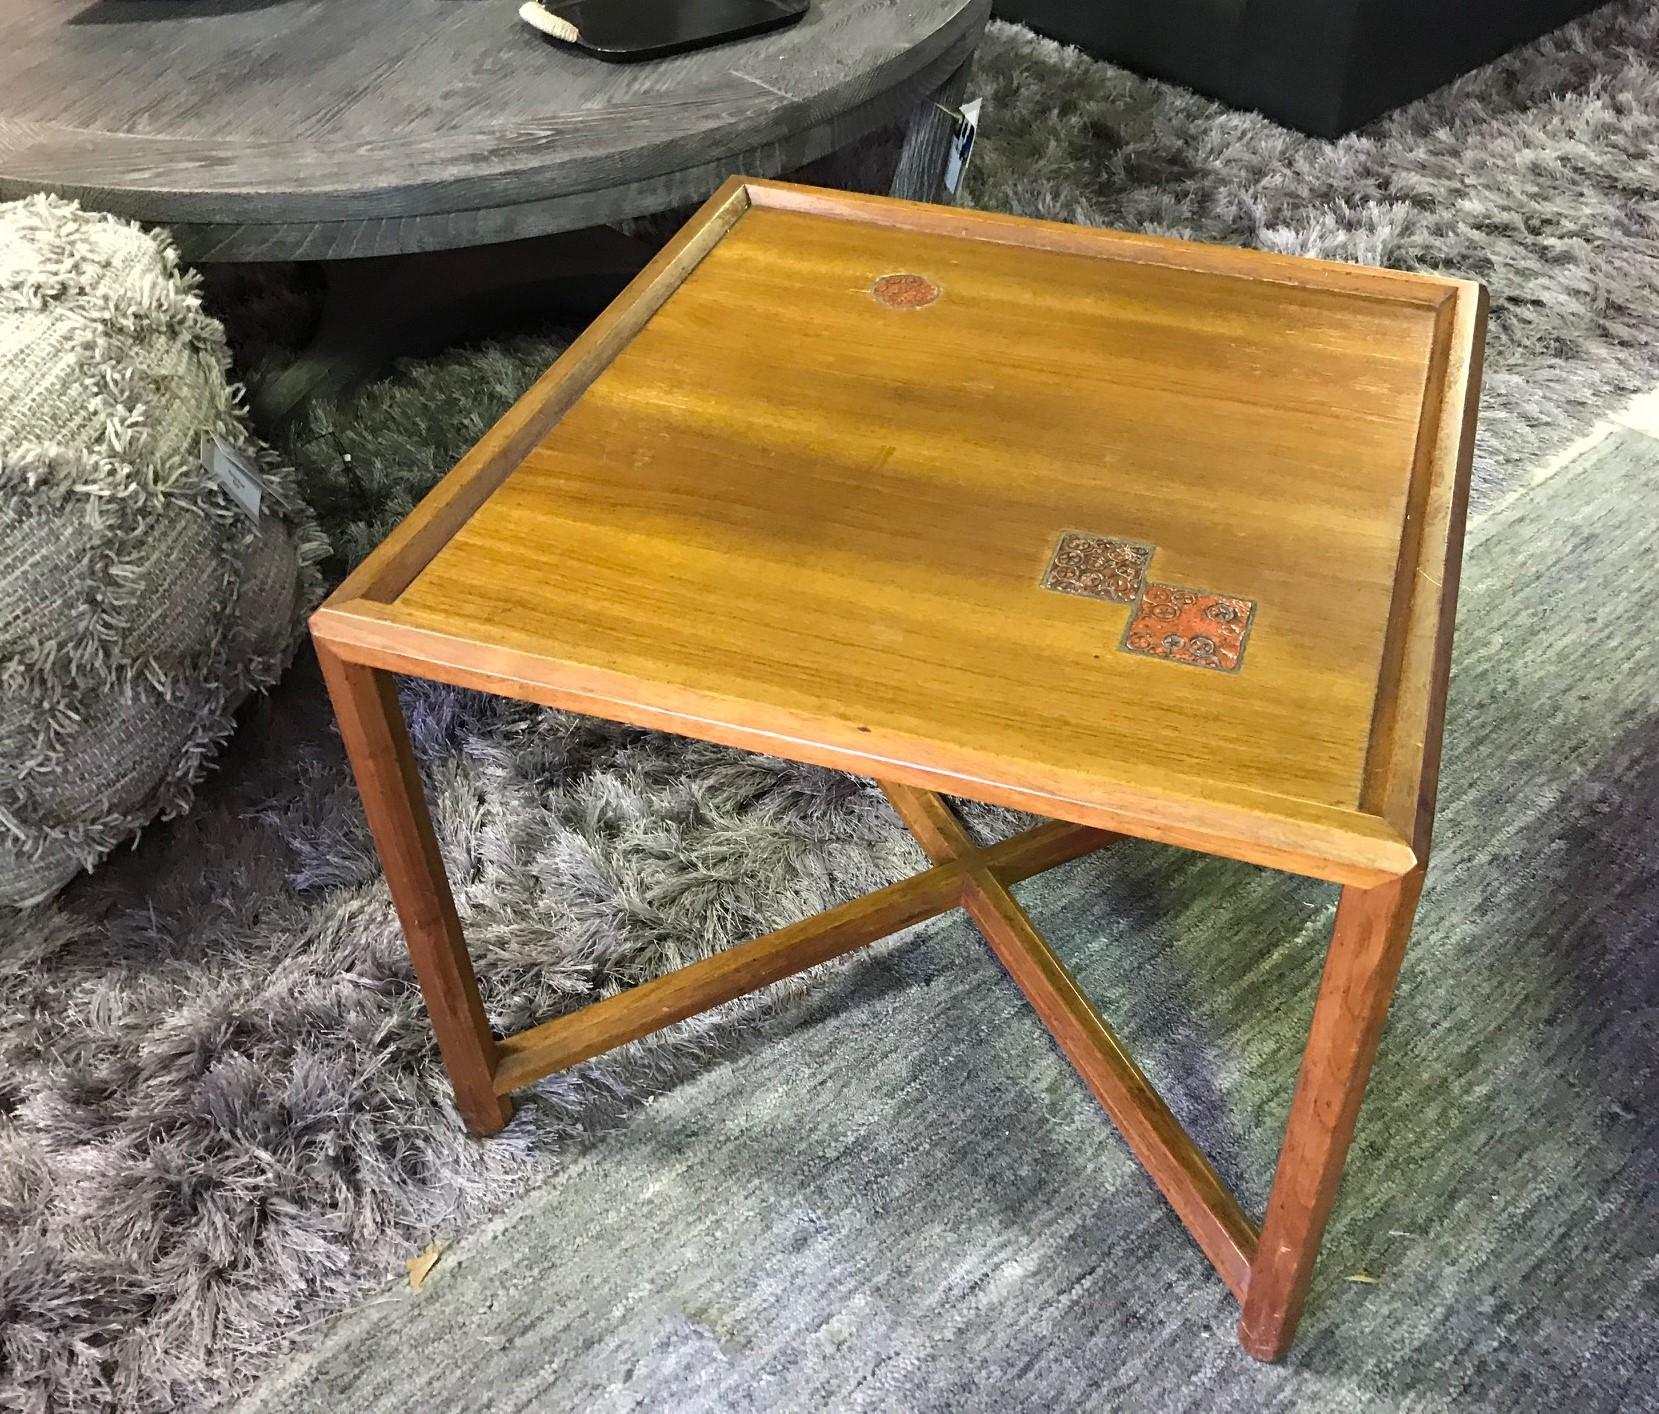 This very rare and absolutely stunning Edward Wormley designed end/ occasional table for Dunbar Furniture for their 